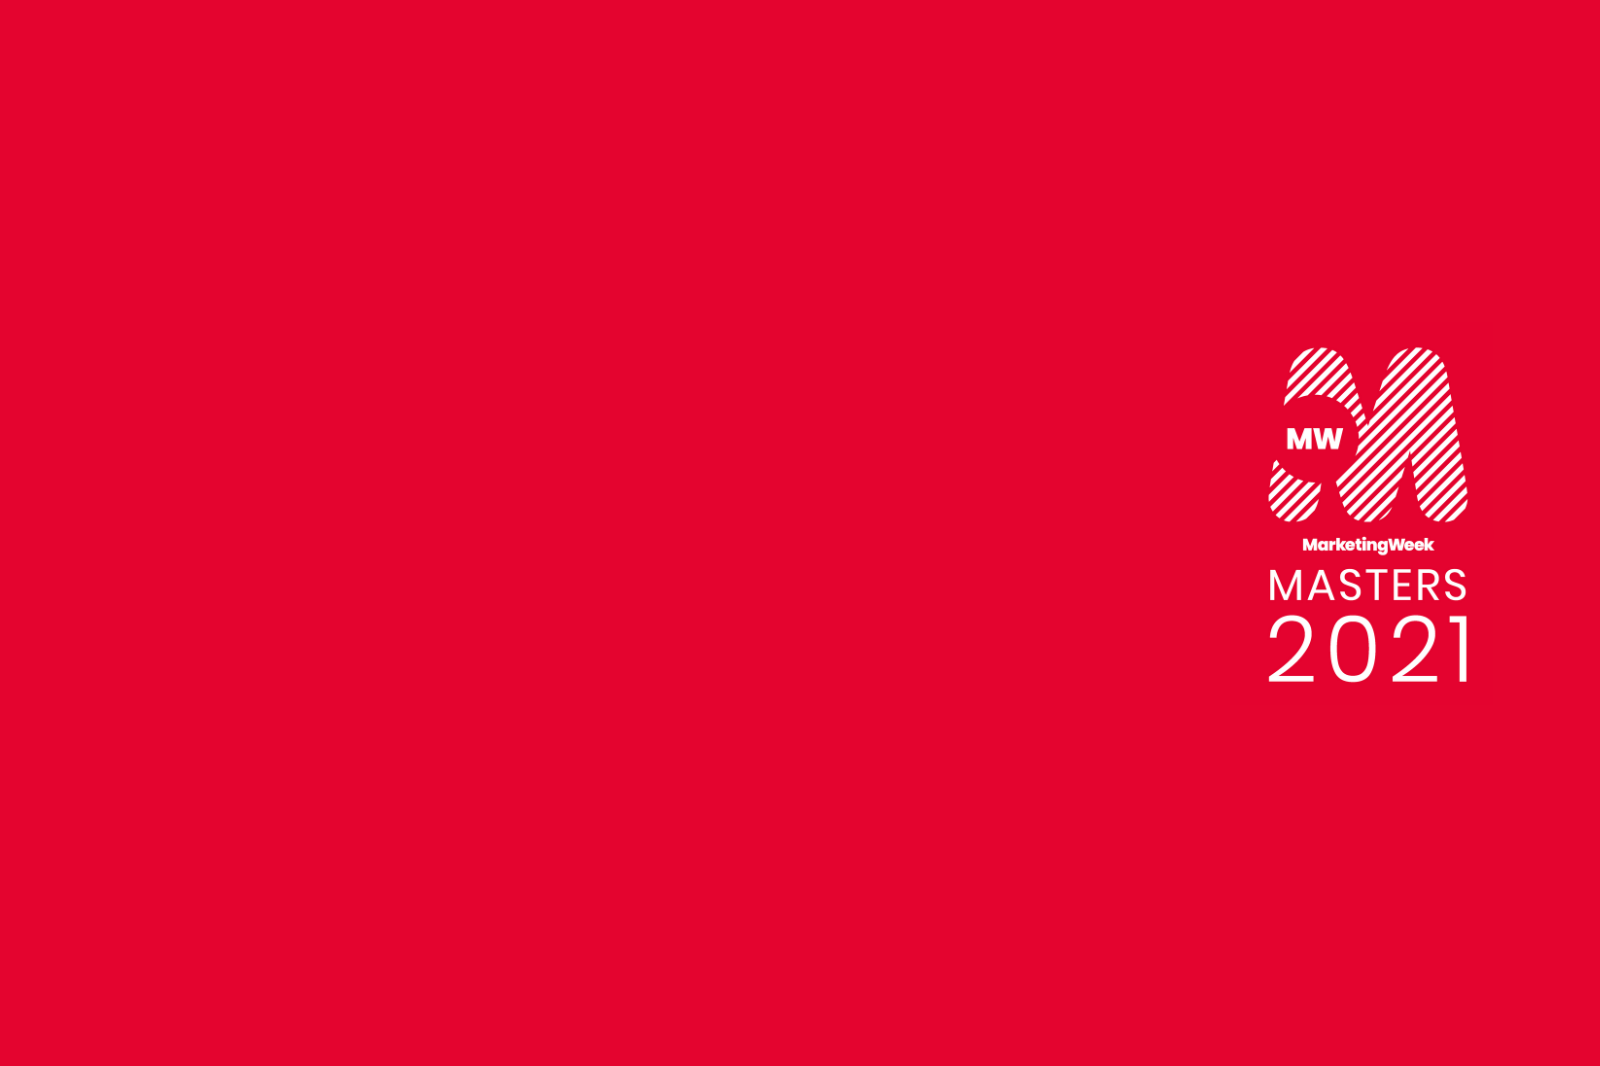 The logo for Marketing Week Awards 2021 on a red background.